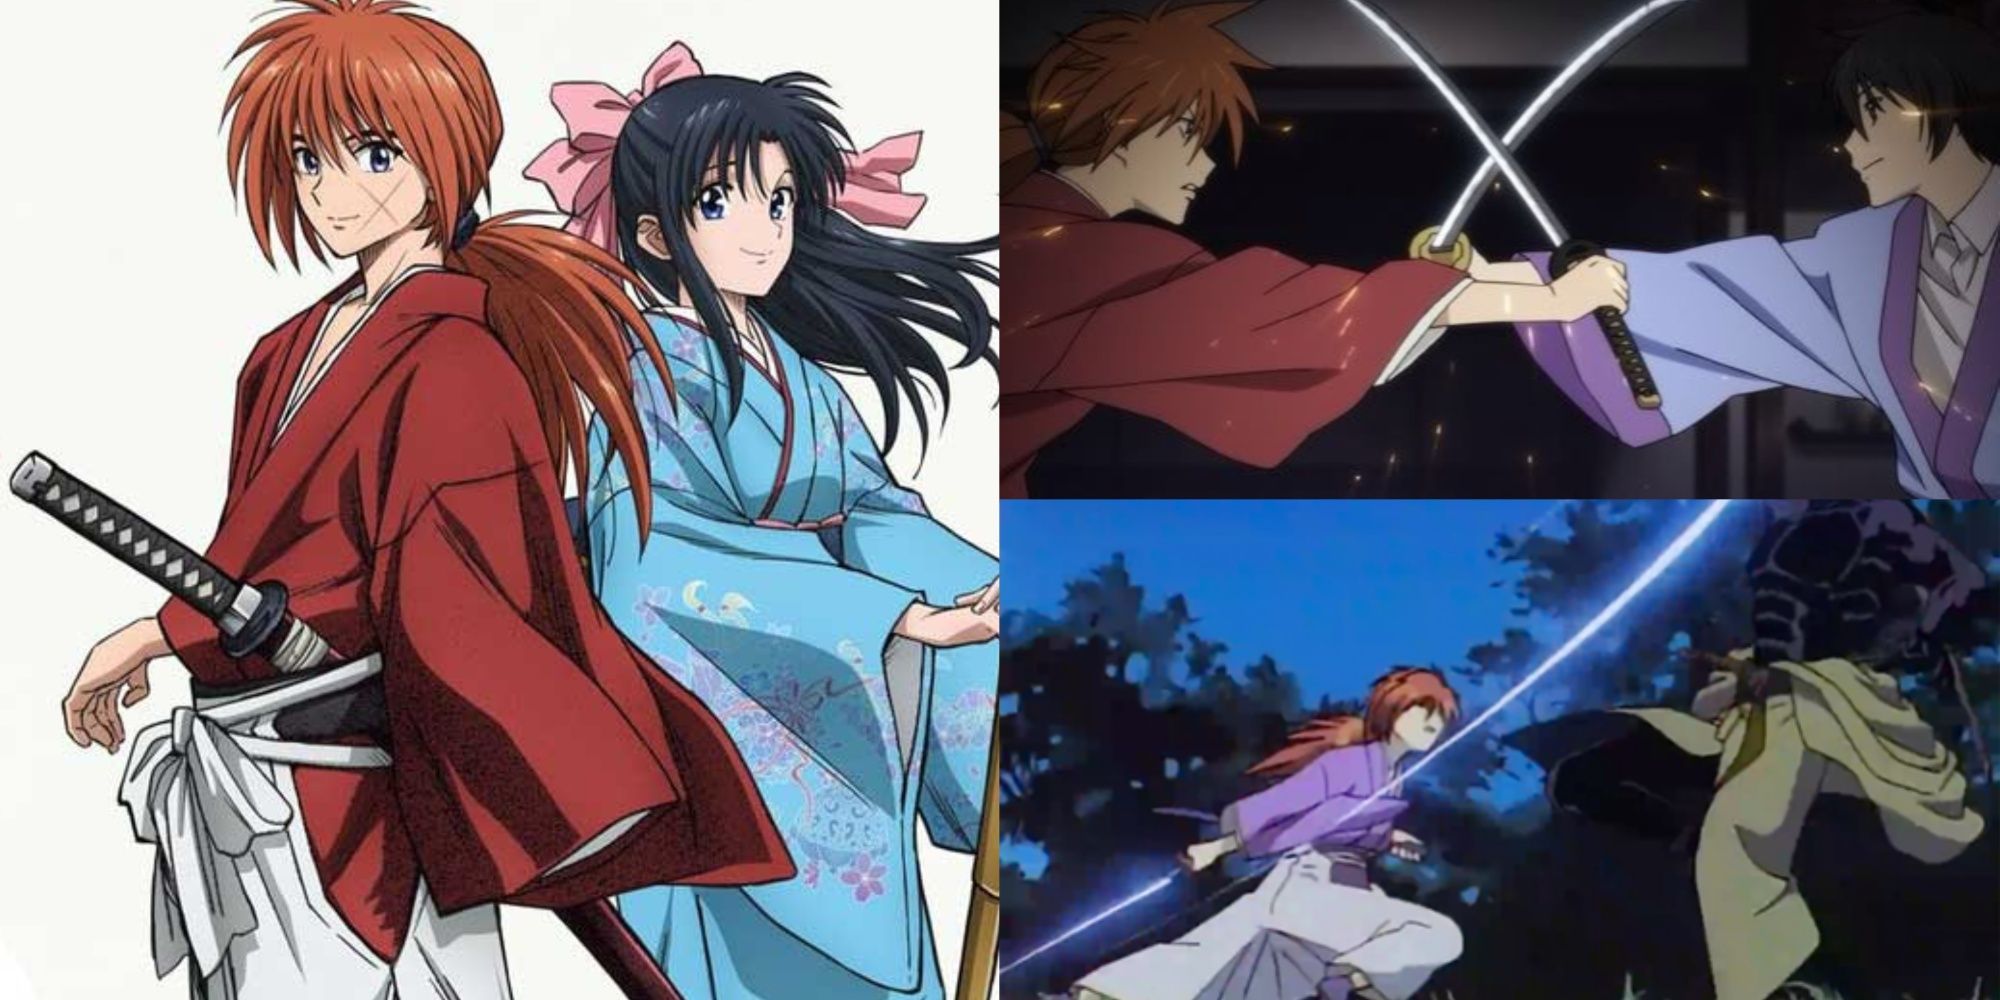 15 Facts About Himura Kenshin, Battousai The Slayer Who Became a